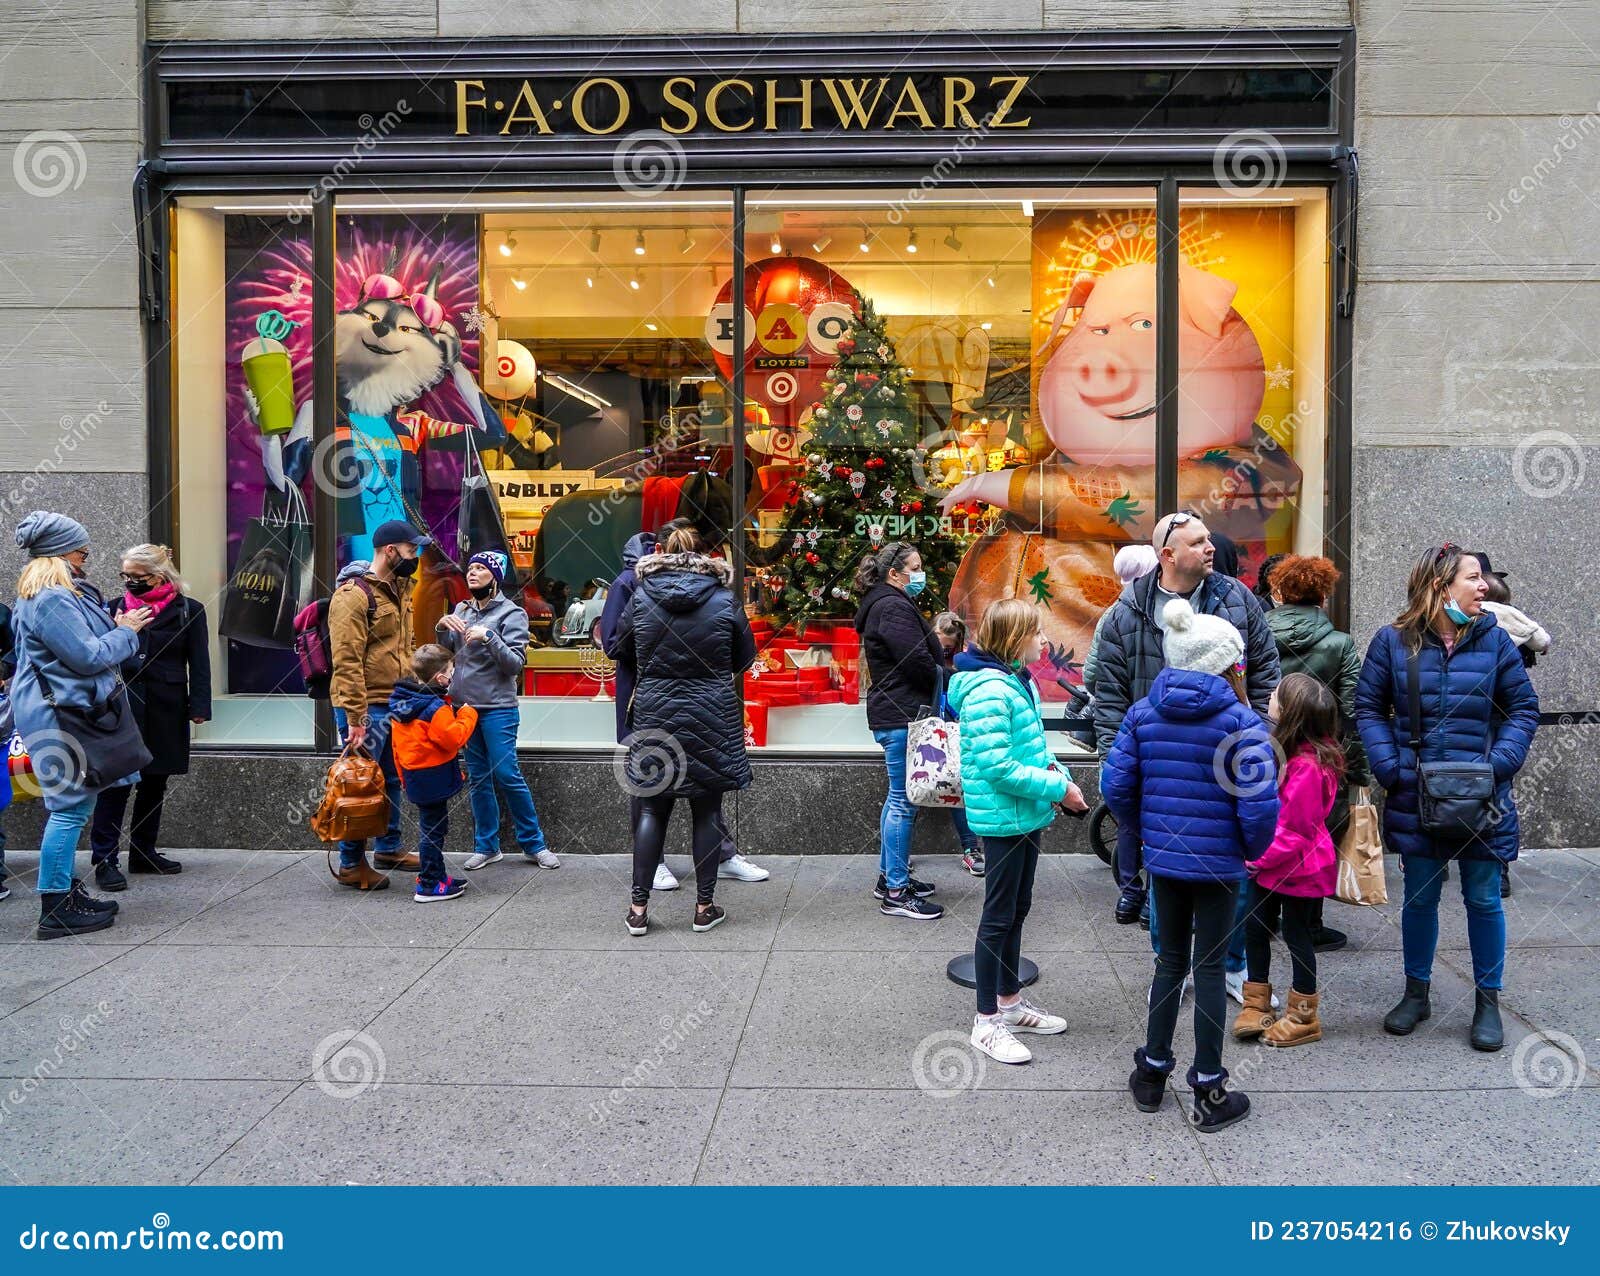 Fao schwarz new york christmas hi-res stock photography and images